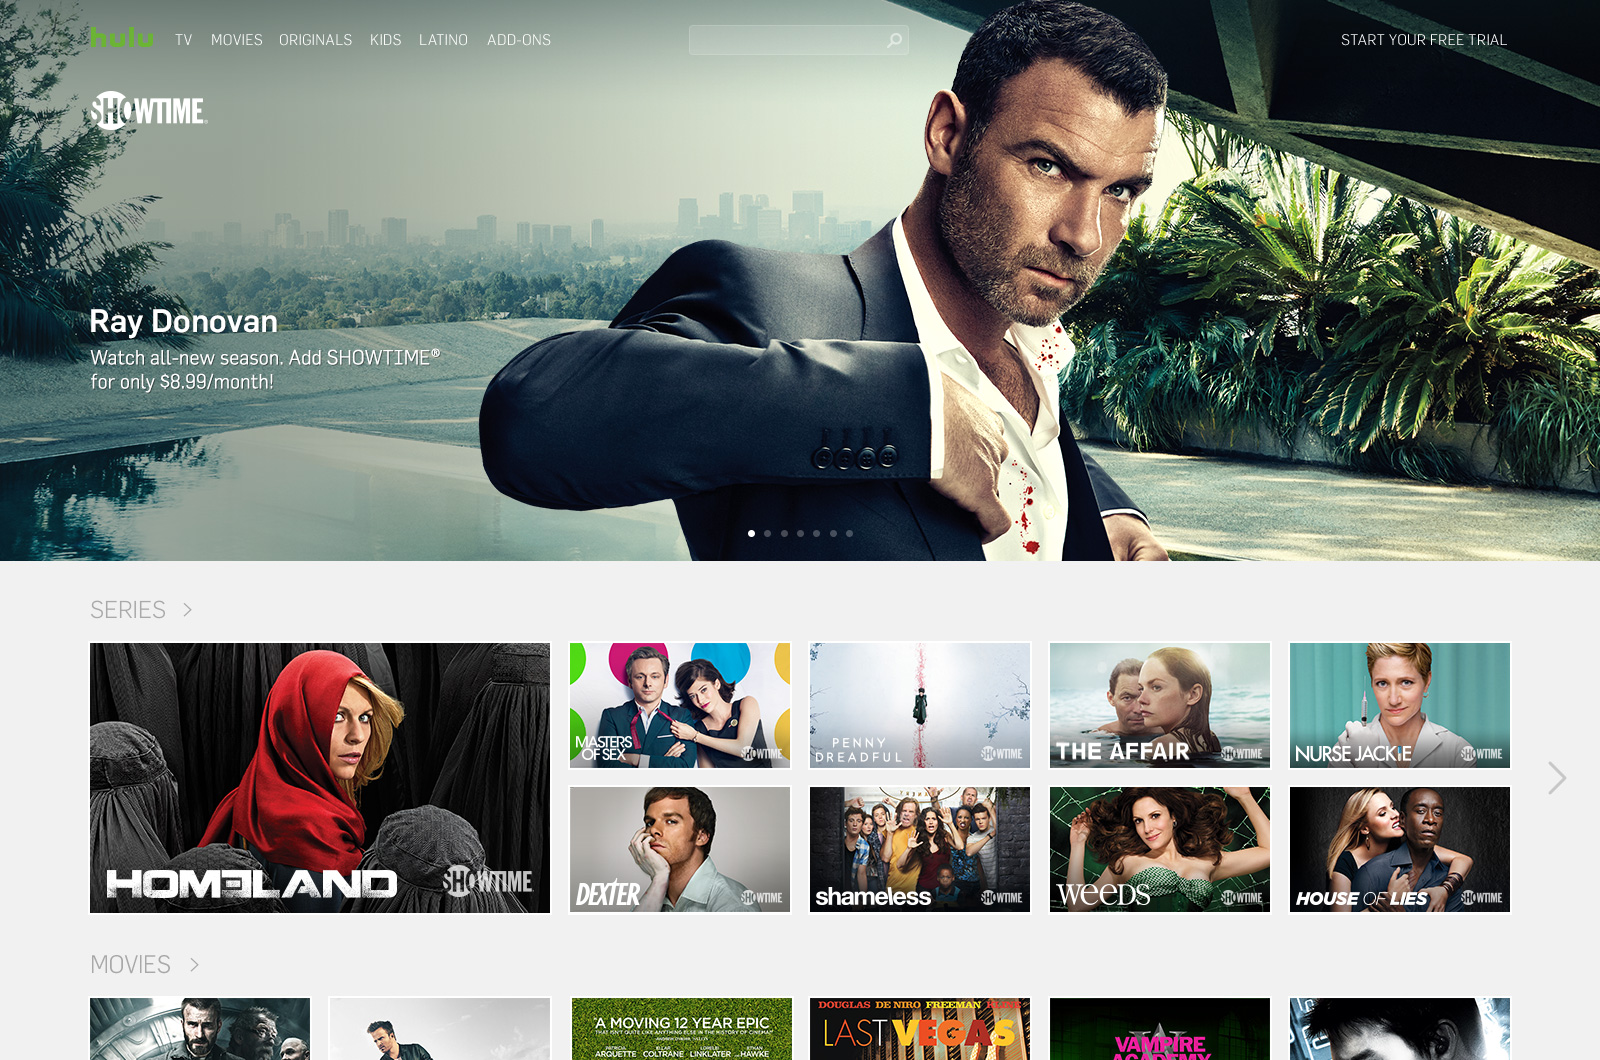 Hulu Will Sell Showtime’s Standalone Streaming Service For $9